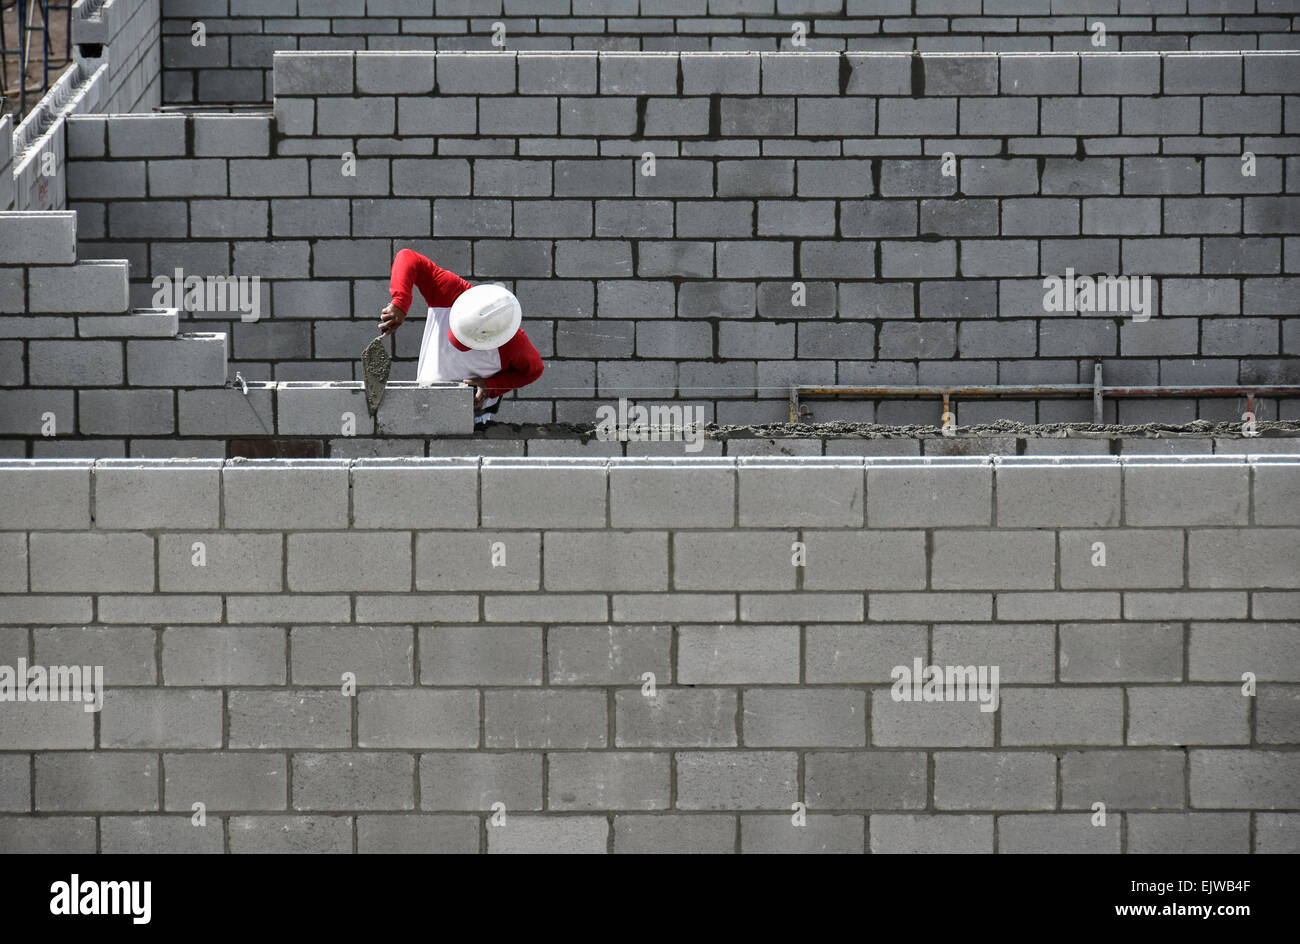 Bricklayer working on brick wall Stock Photo